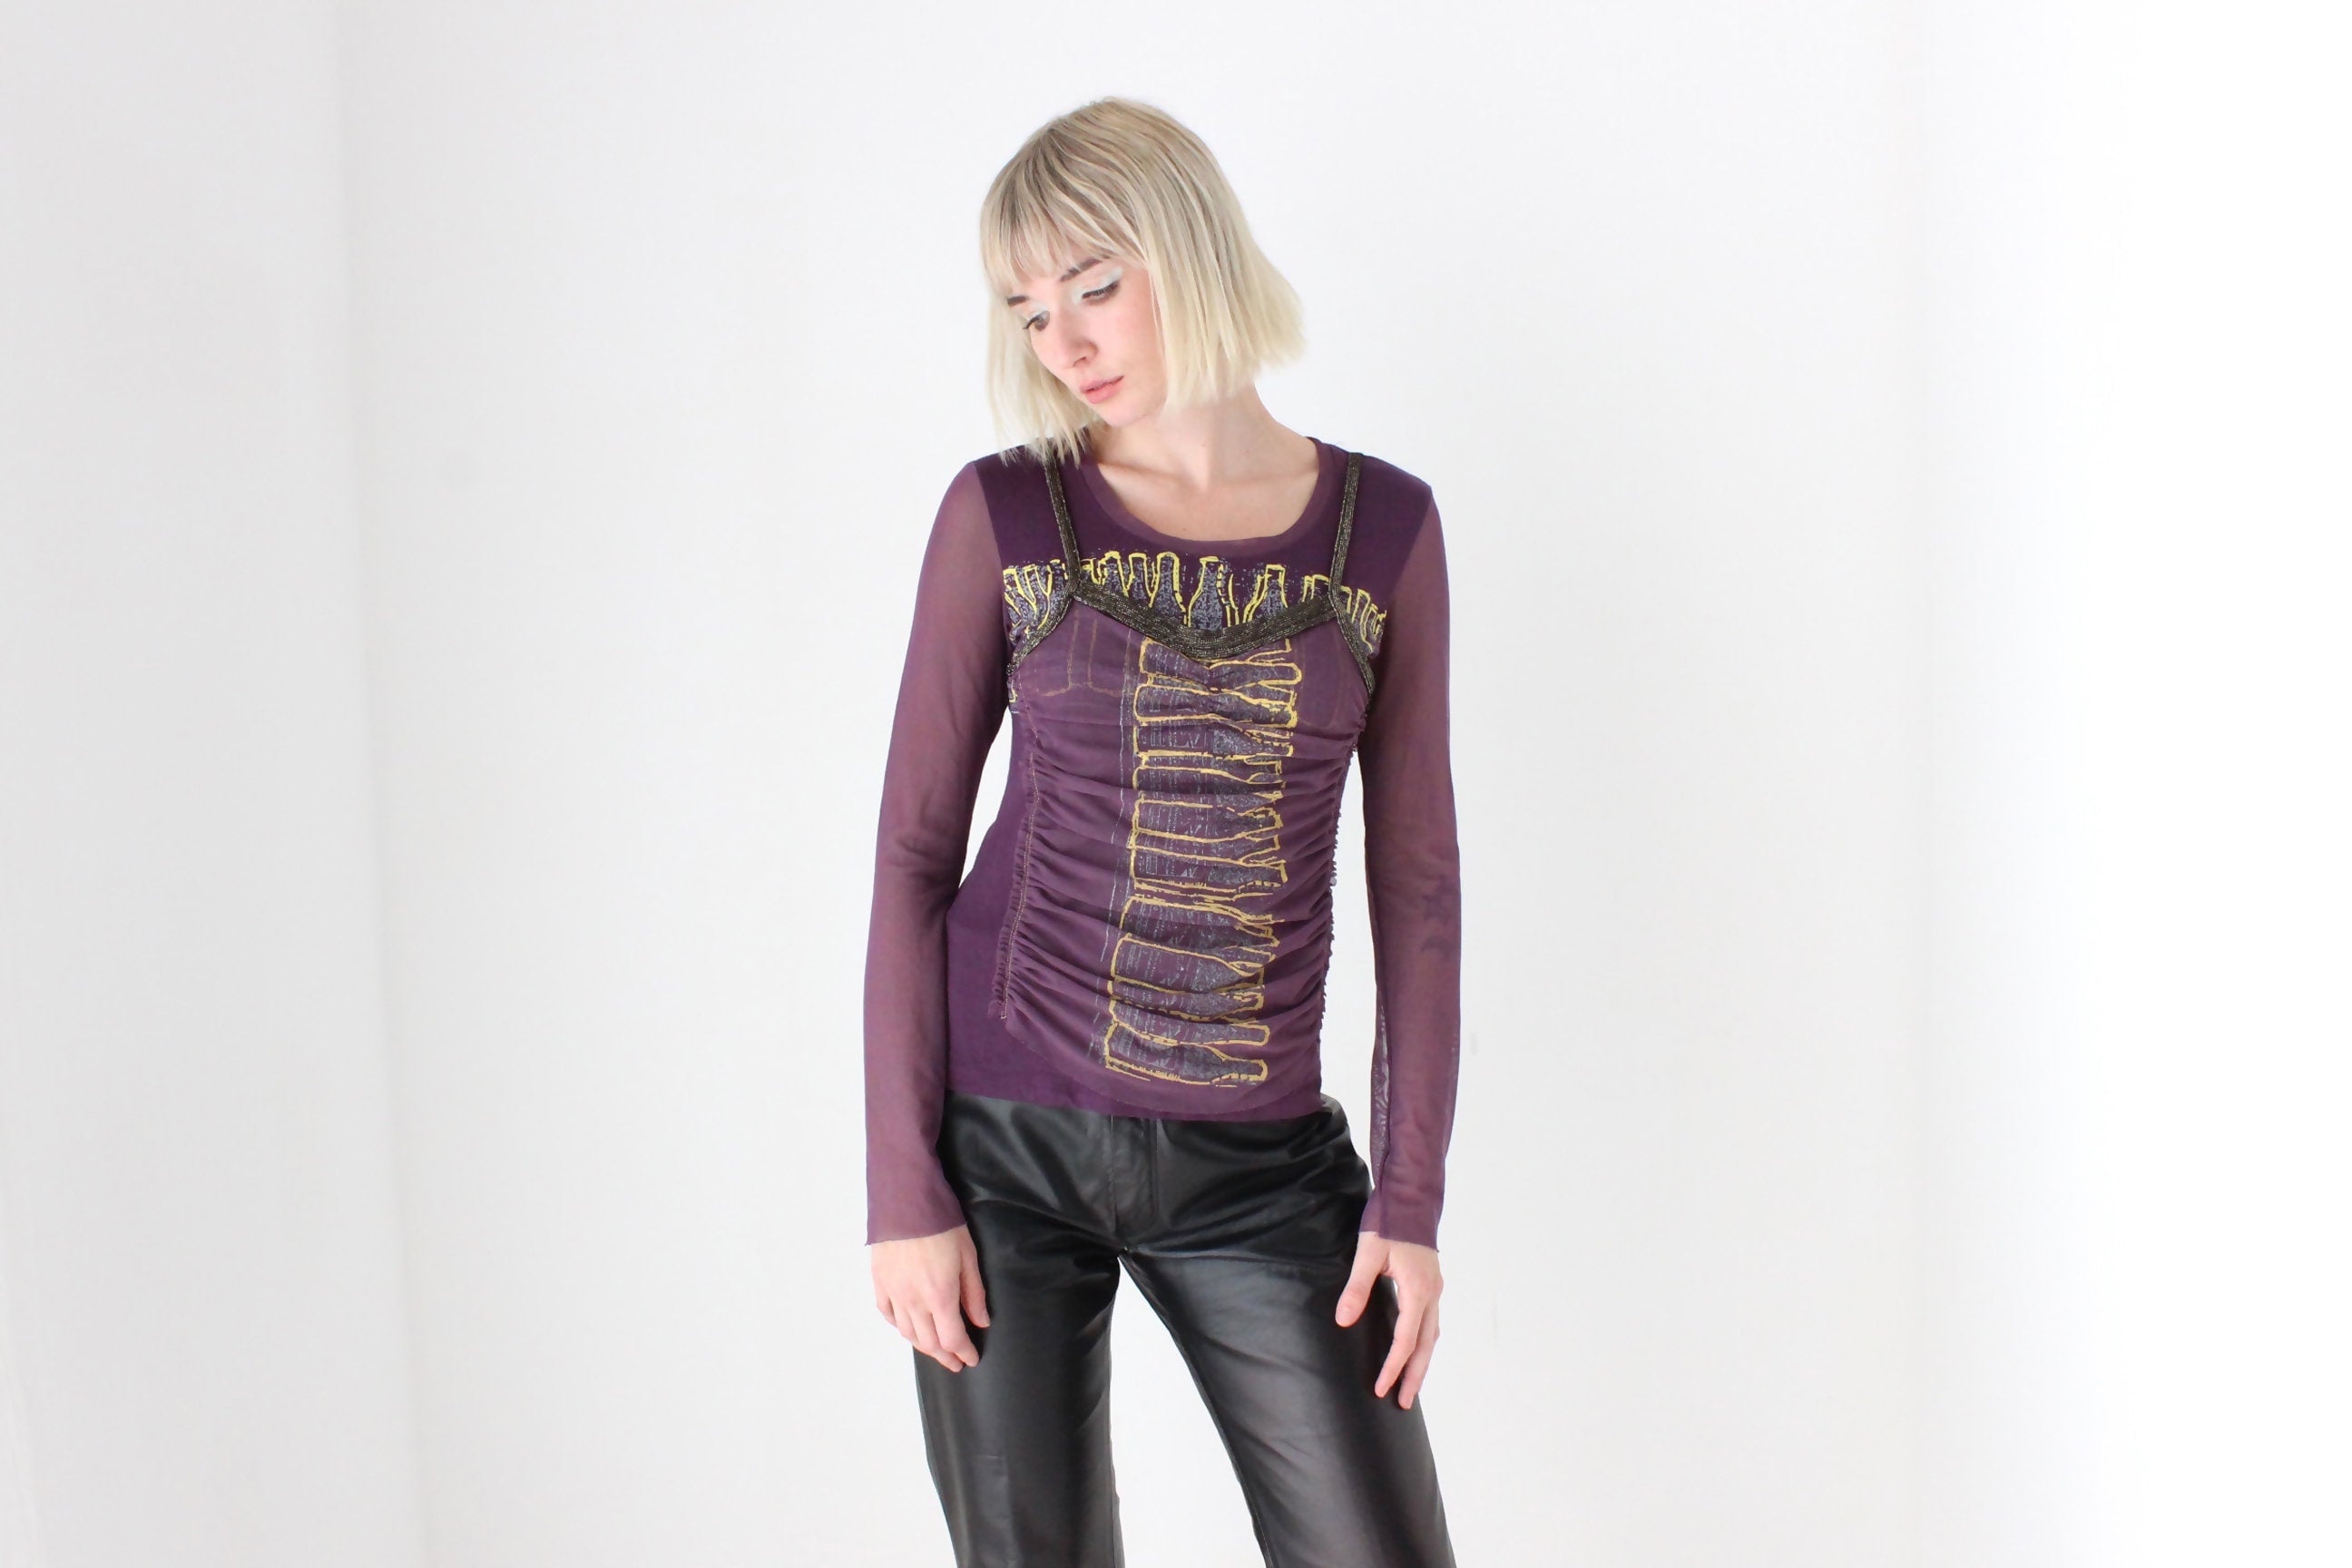 Y2K Abstract Layered Mesh Long Sleeve Stretch Top